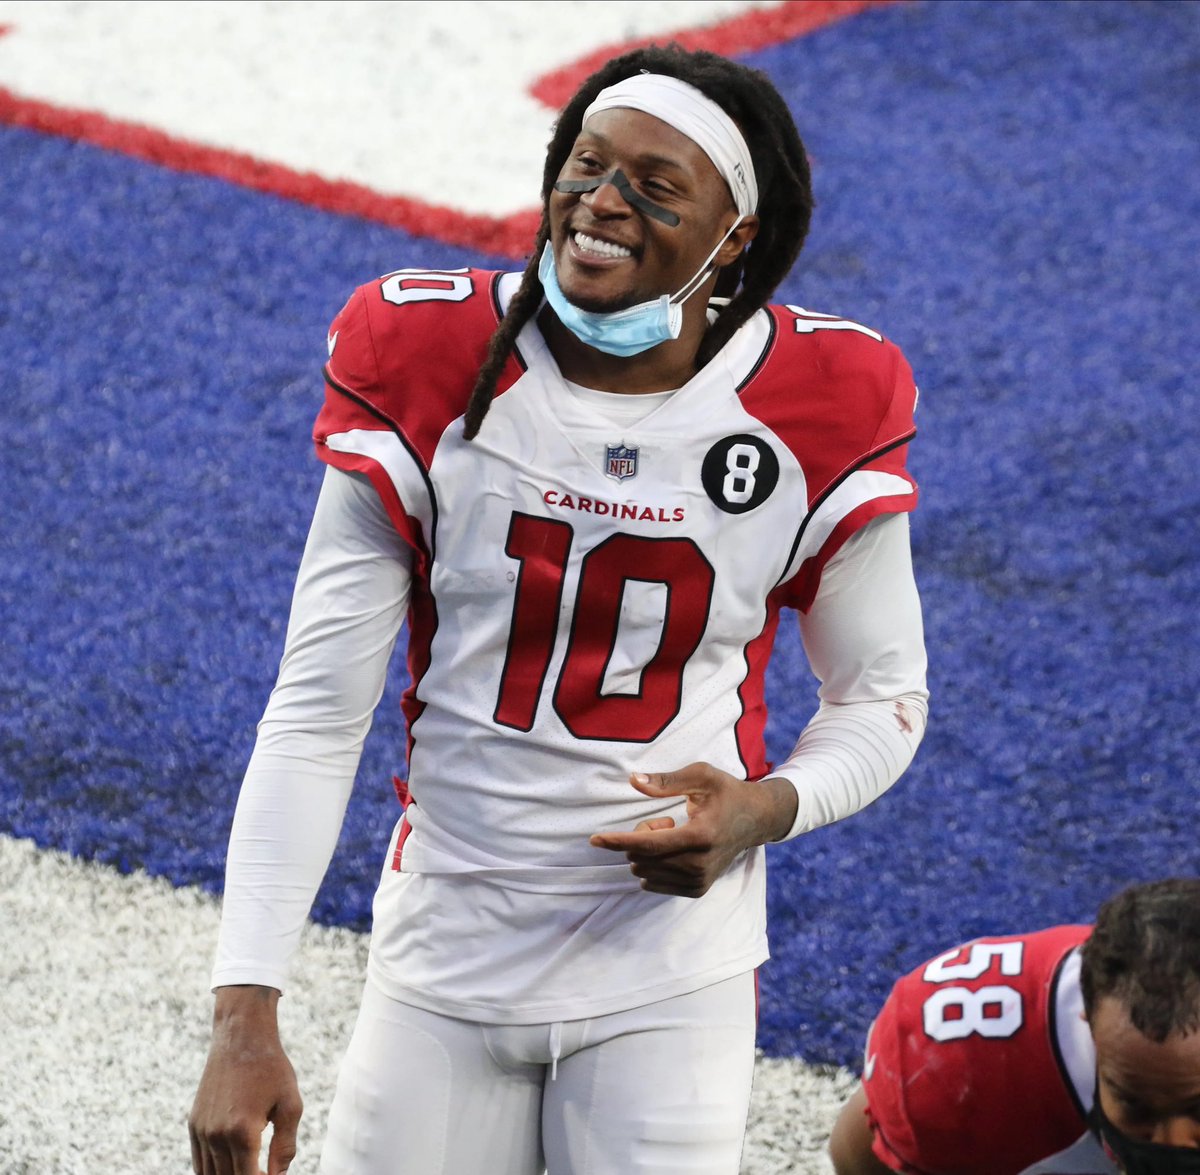 NFL: Was Deandre Hopkins Jailed Or Suspended? Find Out What Happened To Him